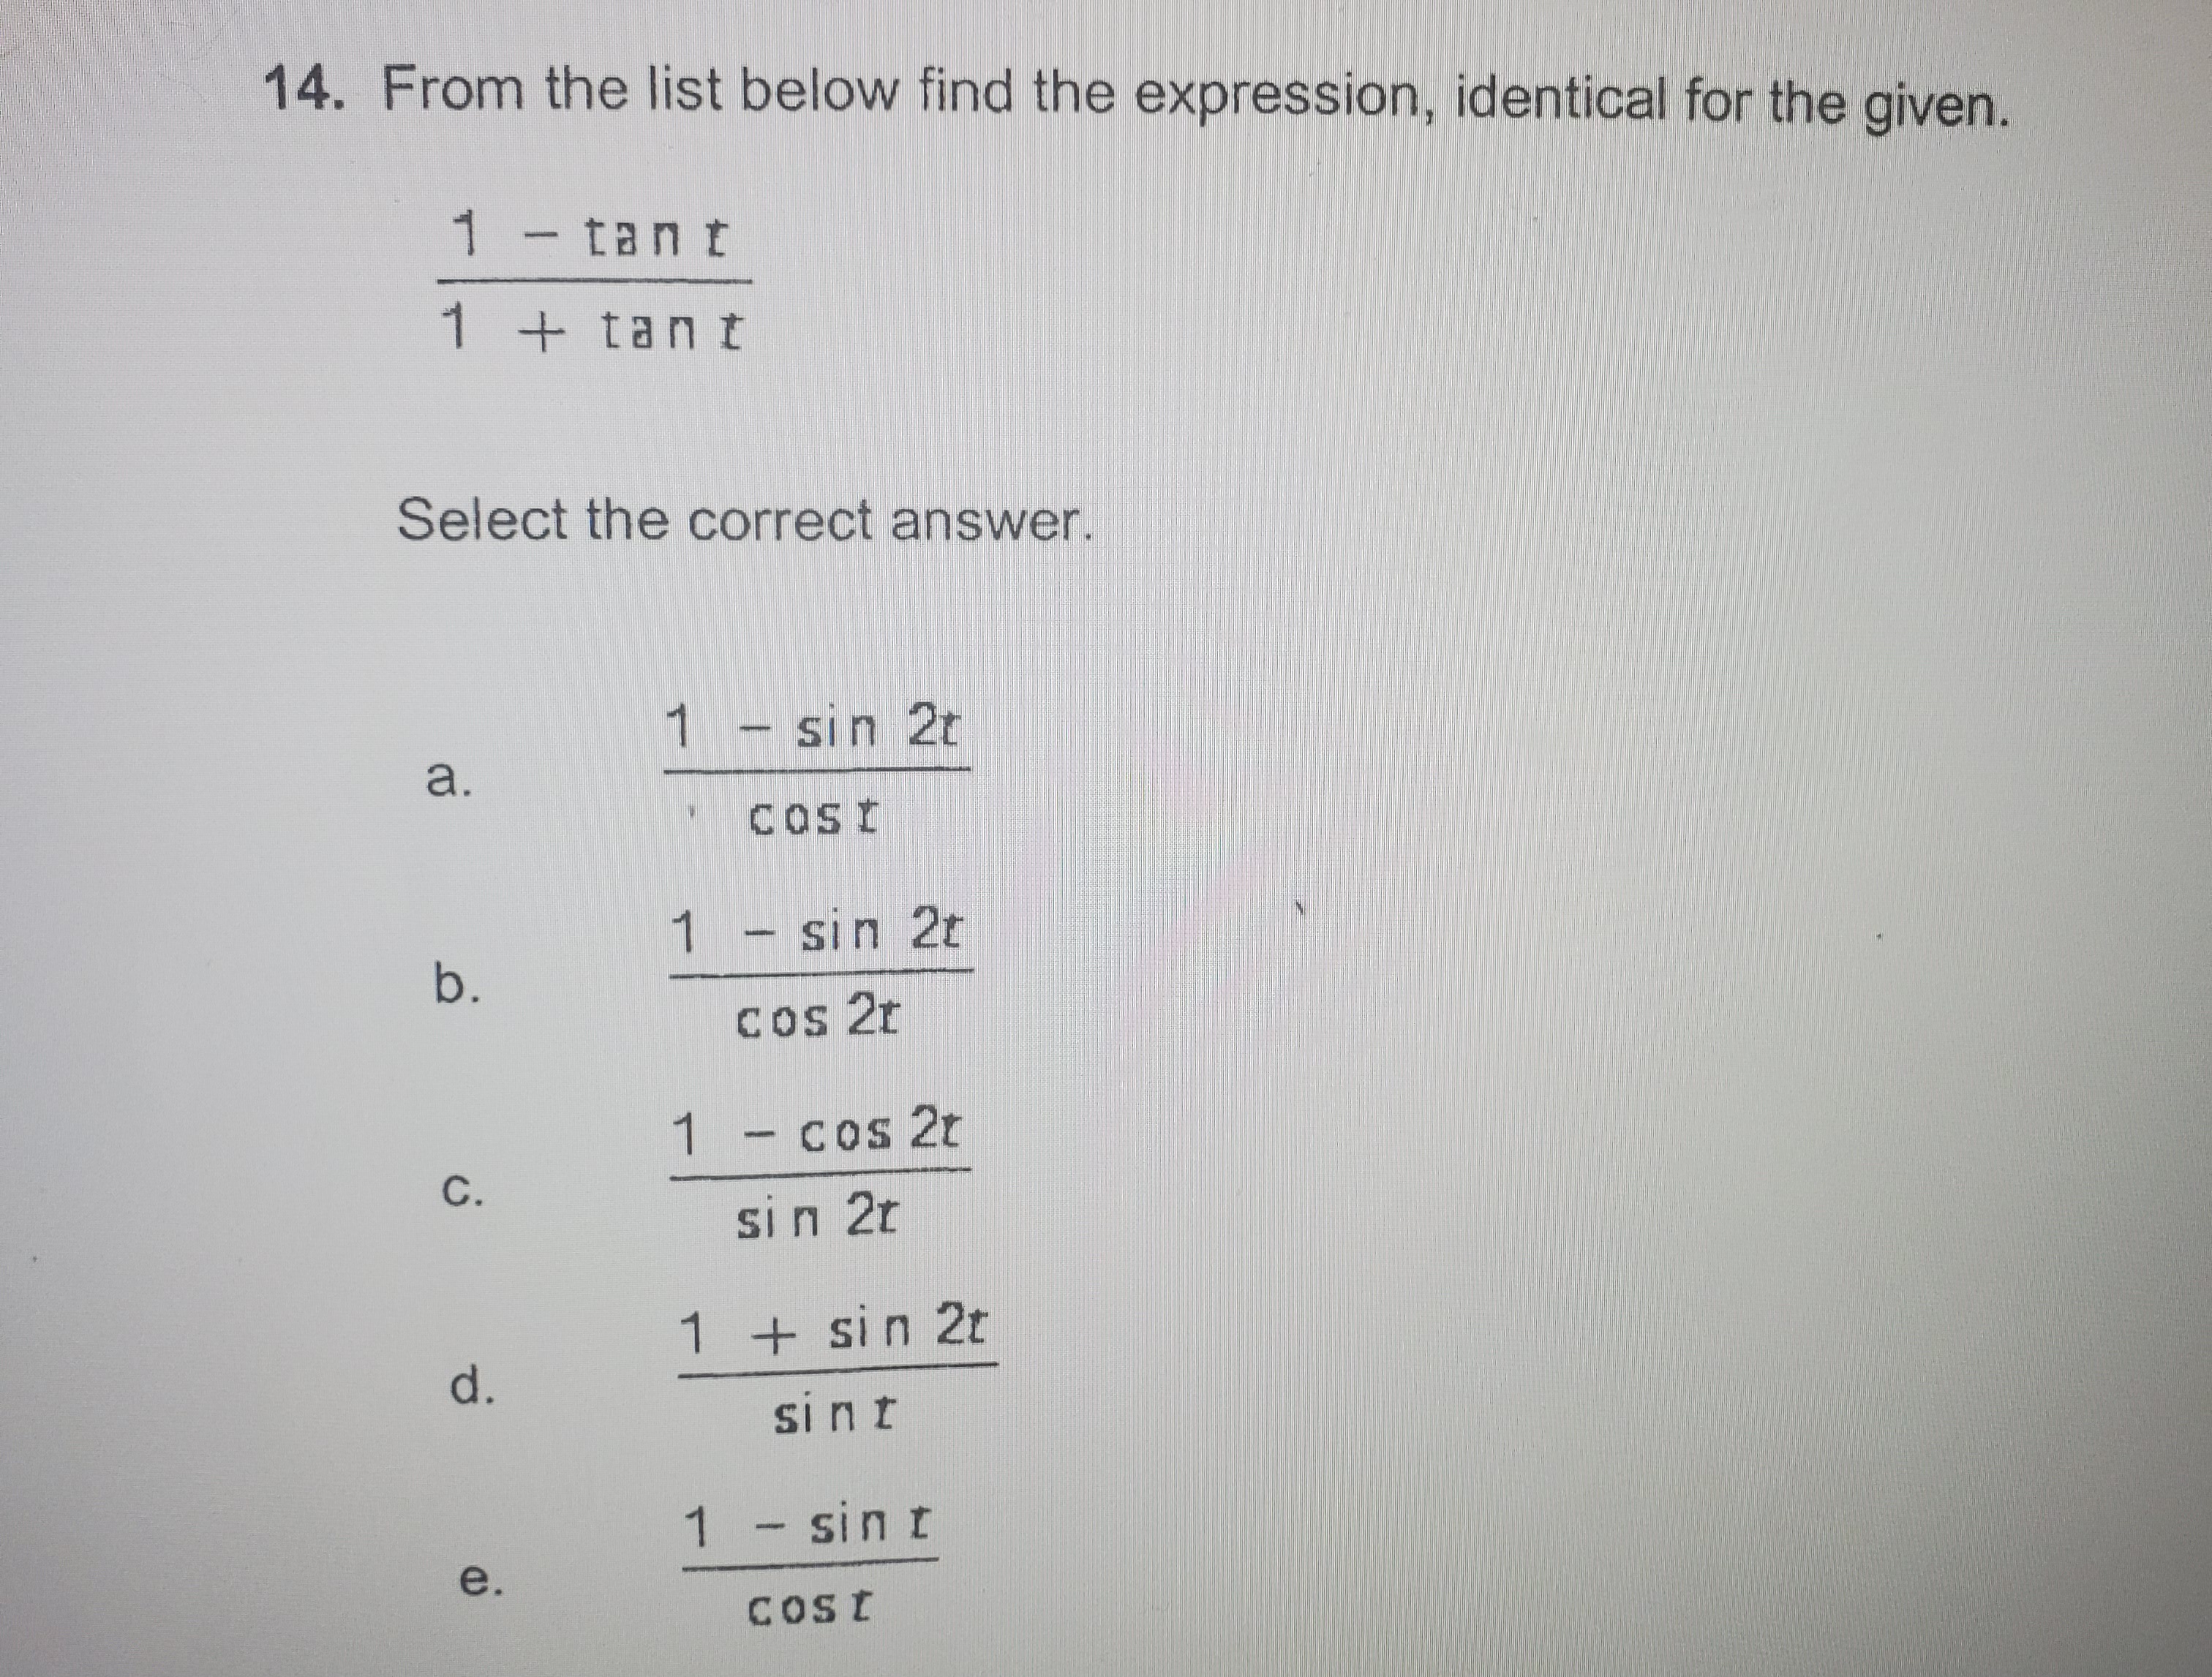 14. From the list below find the expression, identical for the given.
1-tant
1 + tan t
Select the correct answer.
1- sin 2t
a.
Cost
1 - sin 2t
b.
Cos 2t
1 - cos 2t
C.
si n 2t
1 + sin 2t
d.
si nt
1 - sin t
e.
COst
